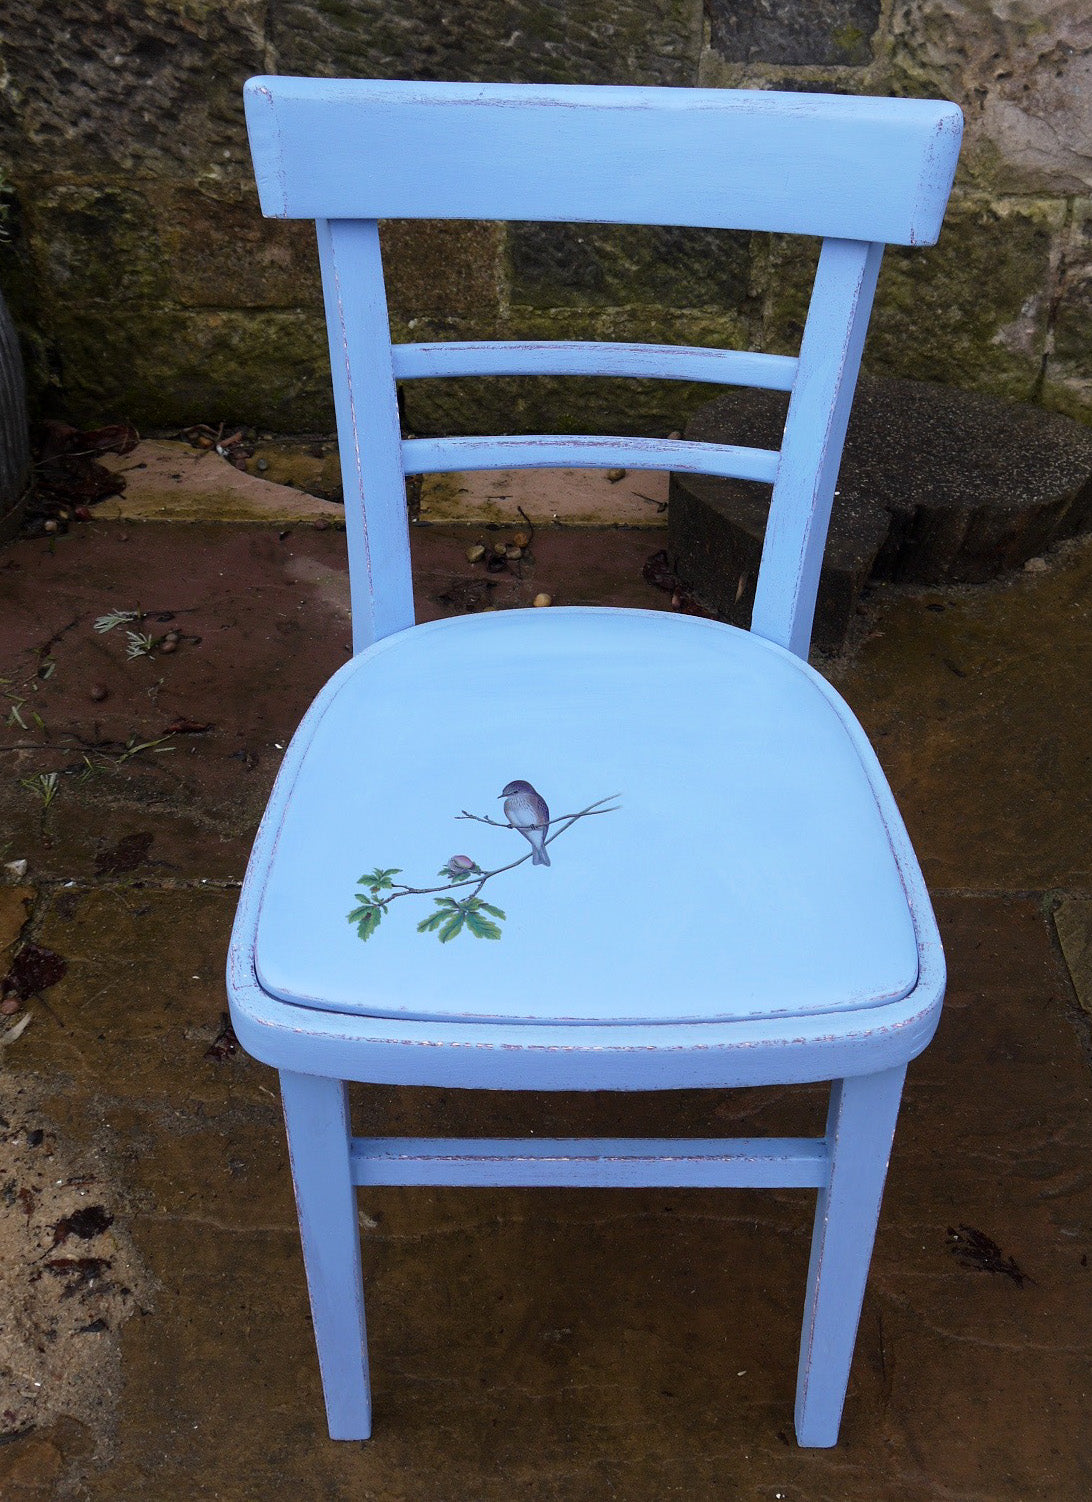 Little painted chair with painted vinyl seat and bird design. The woodwork has been painted in layers of aubergine and bright blue andxa bird on a branch has been added to the old vinyl seat.